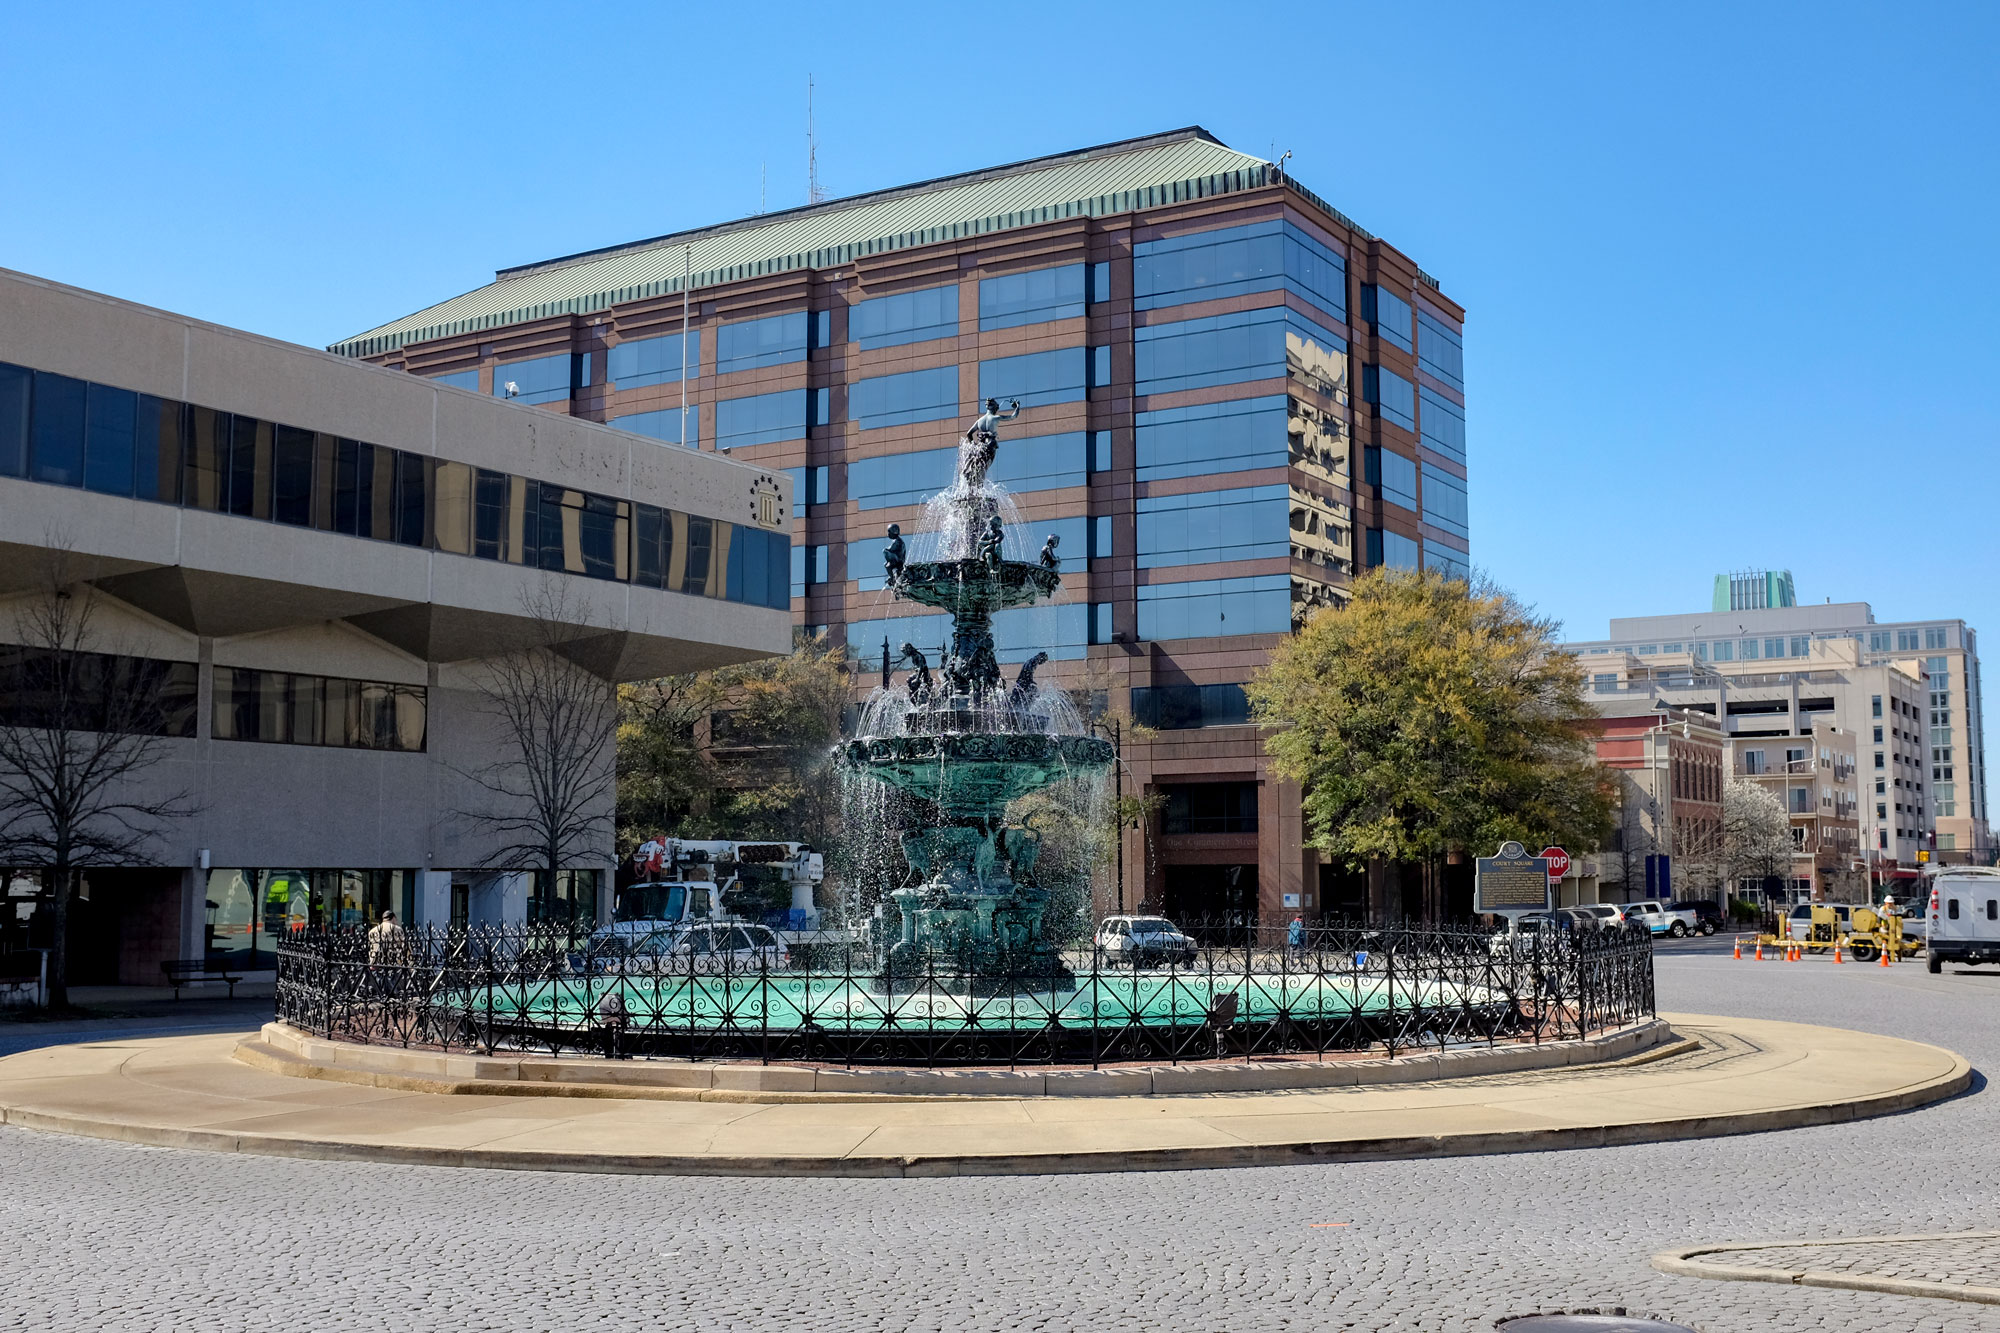 Fountain in downtown montgomery